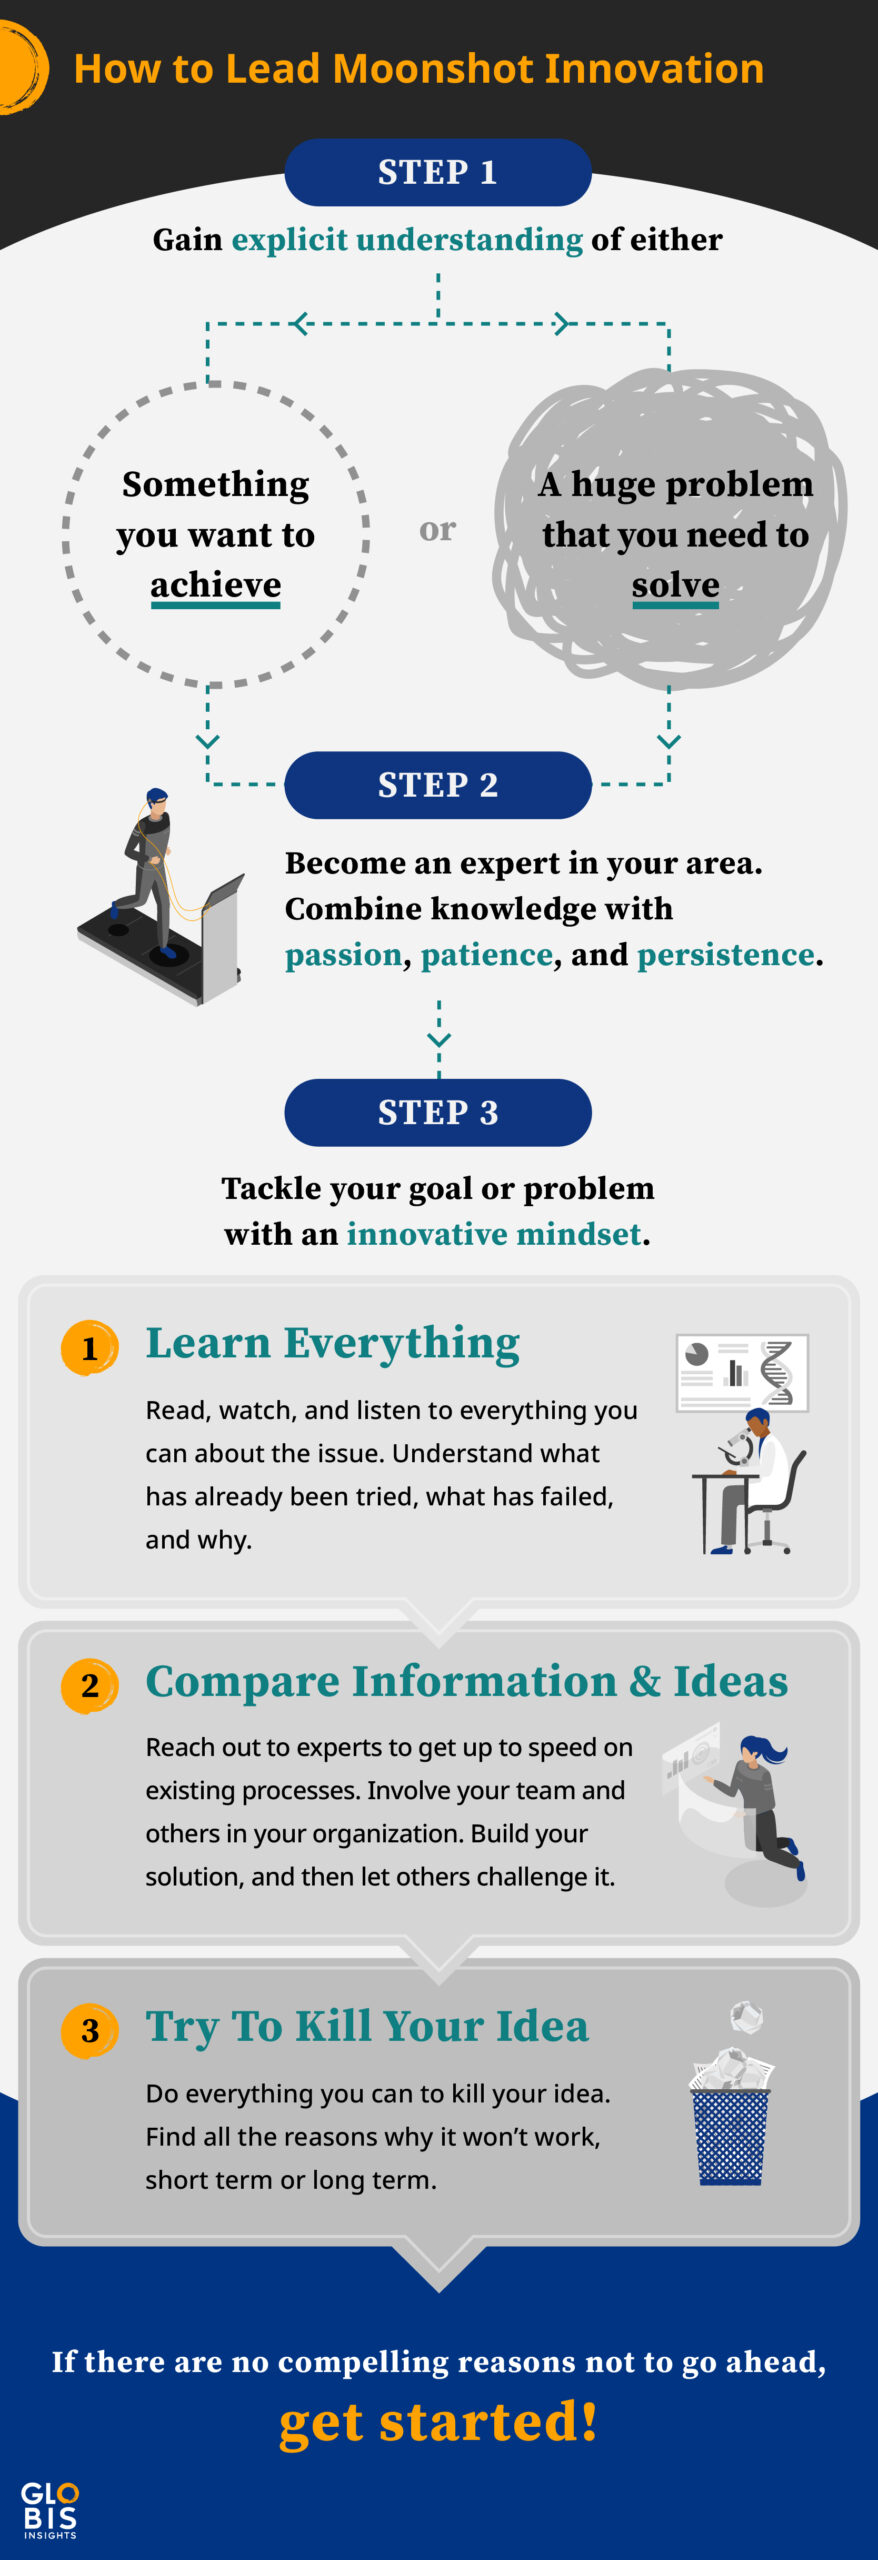 Infographic with the 3 steps for how to lead moonshot innovation for business process transformation